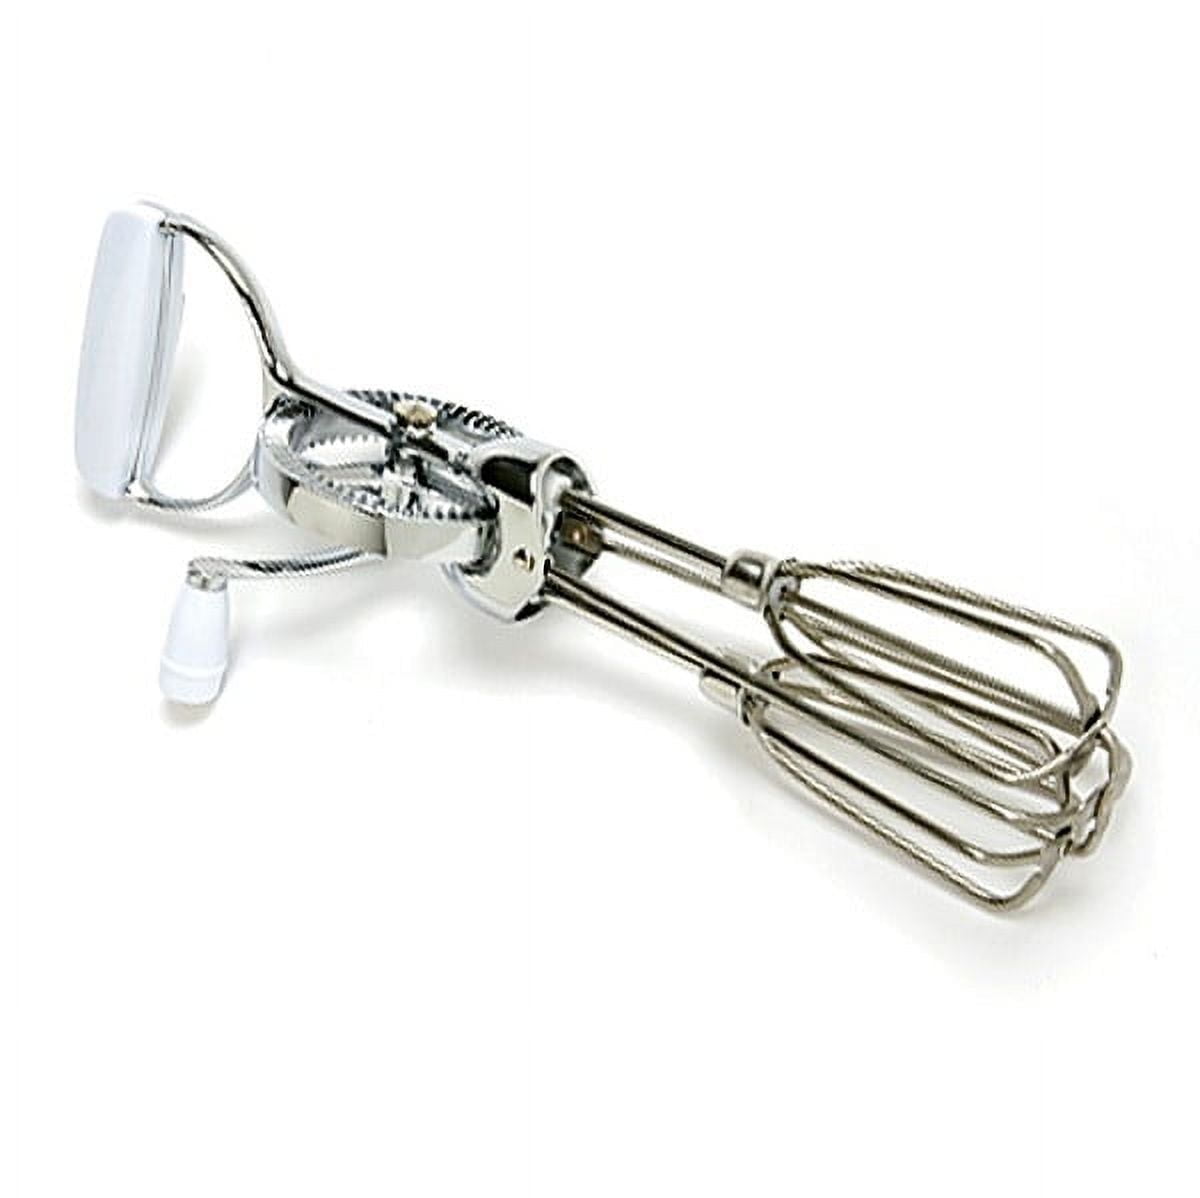 Classic Hand-Crank Manual Egg Beater  Egg beaters, Tools and toys, Special  birthday cakes